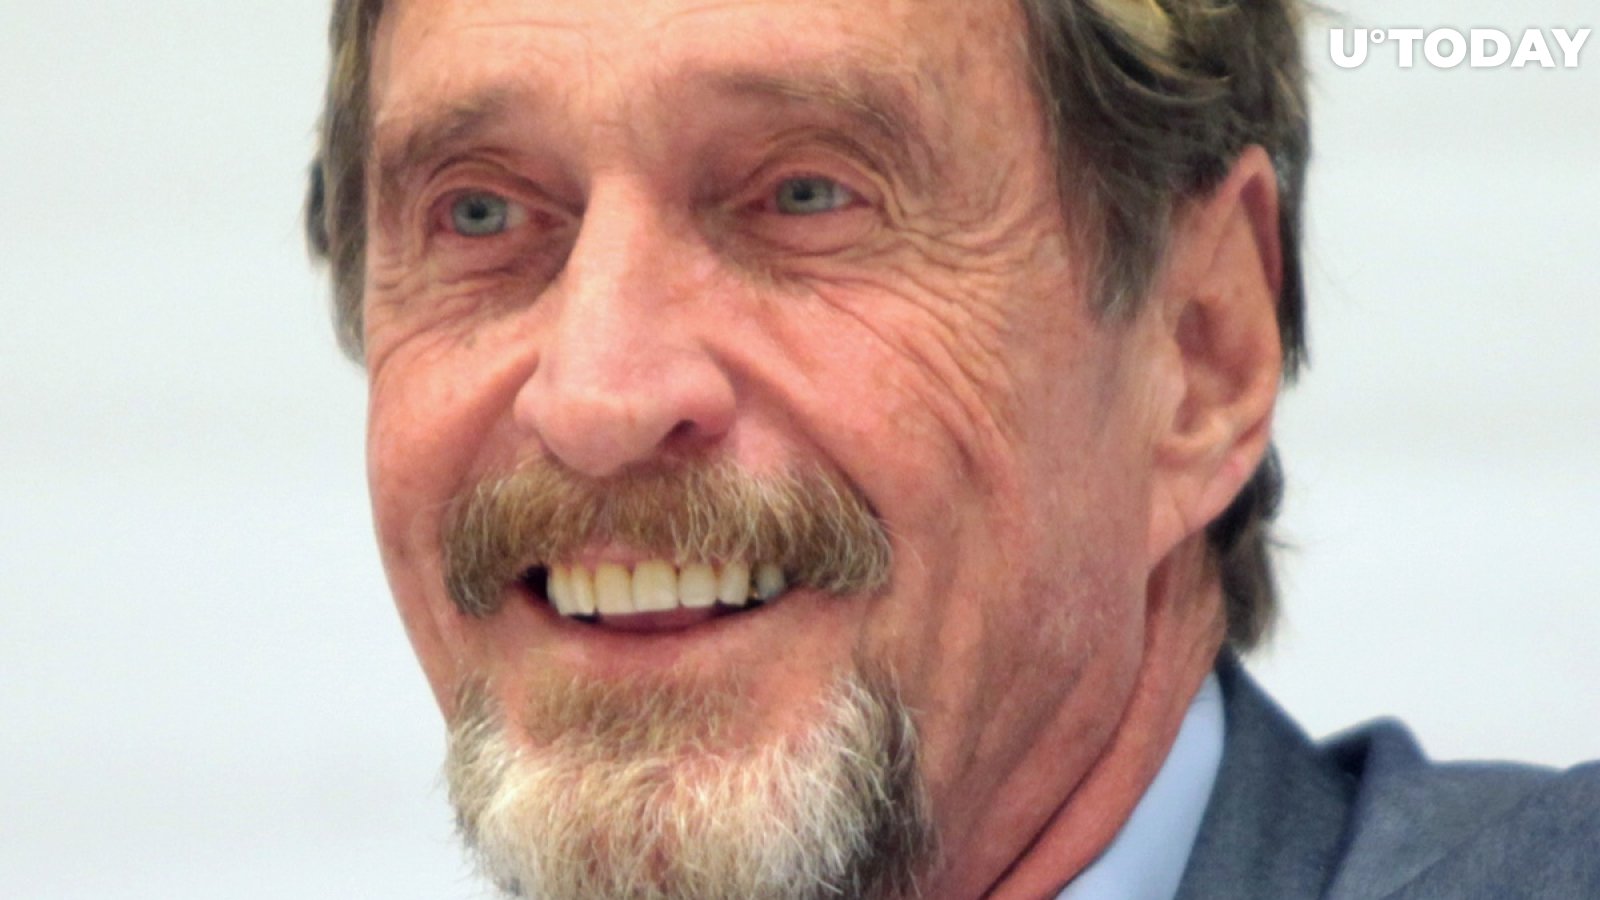 John McAfee: $400,000?? Bitcoin Price Must Hit $1 Mln In Two Years!